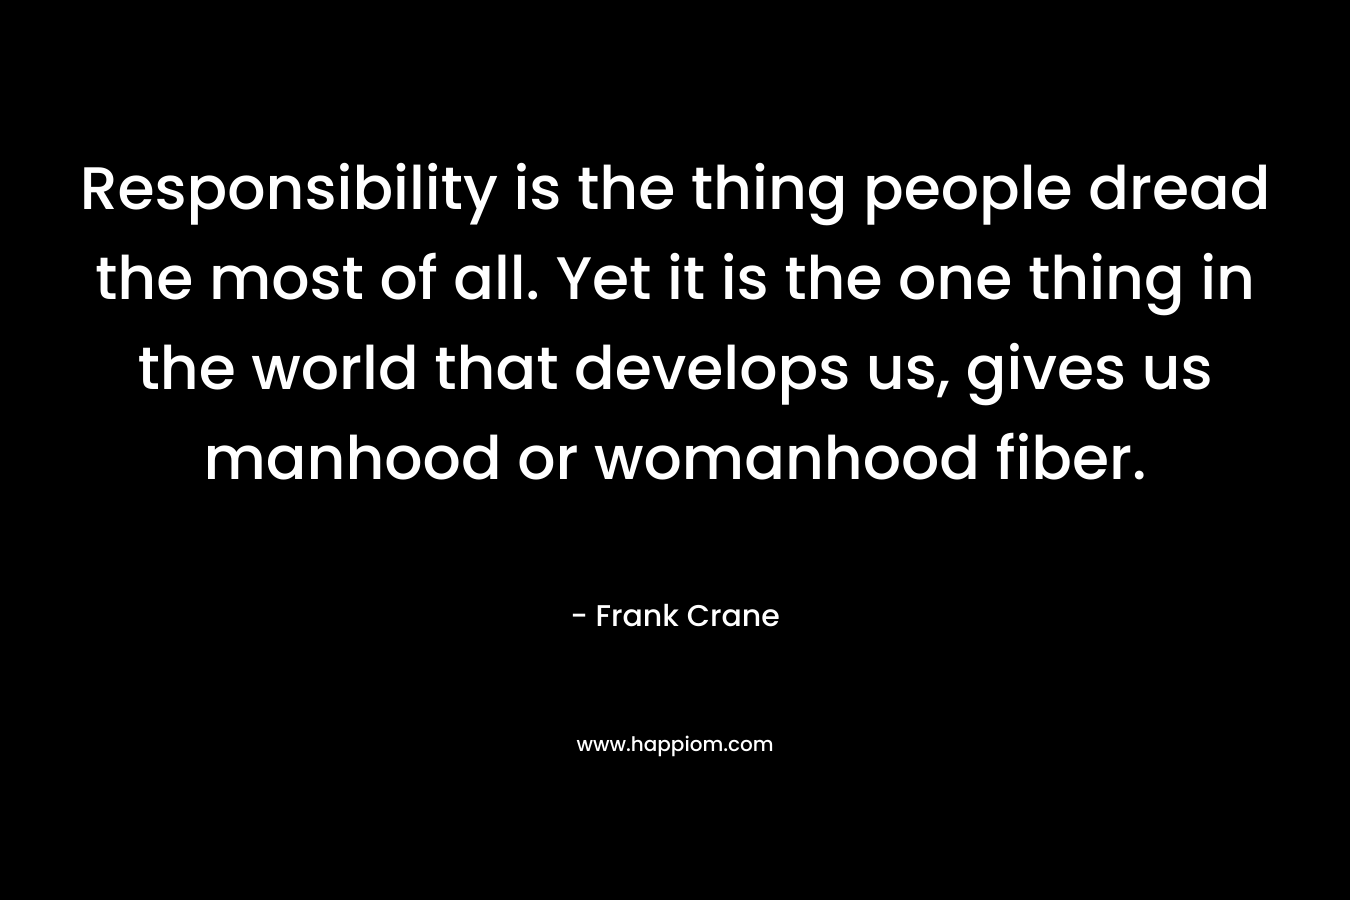 Responsibility is the thing people dread the most of all. Yet it is the one thing in the world that develops us, gives us manhood or womanhood fiber.